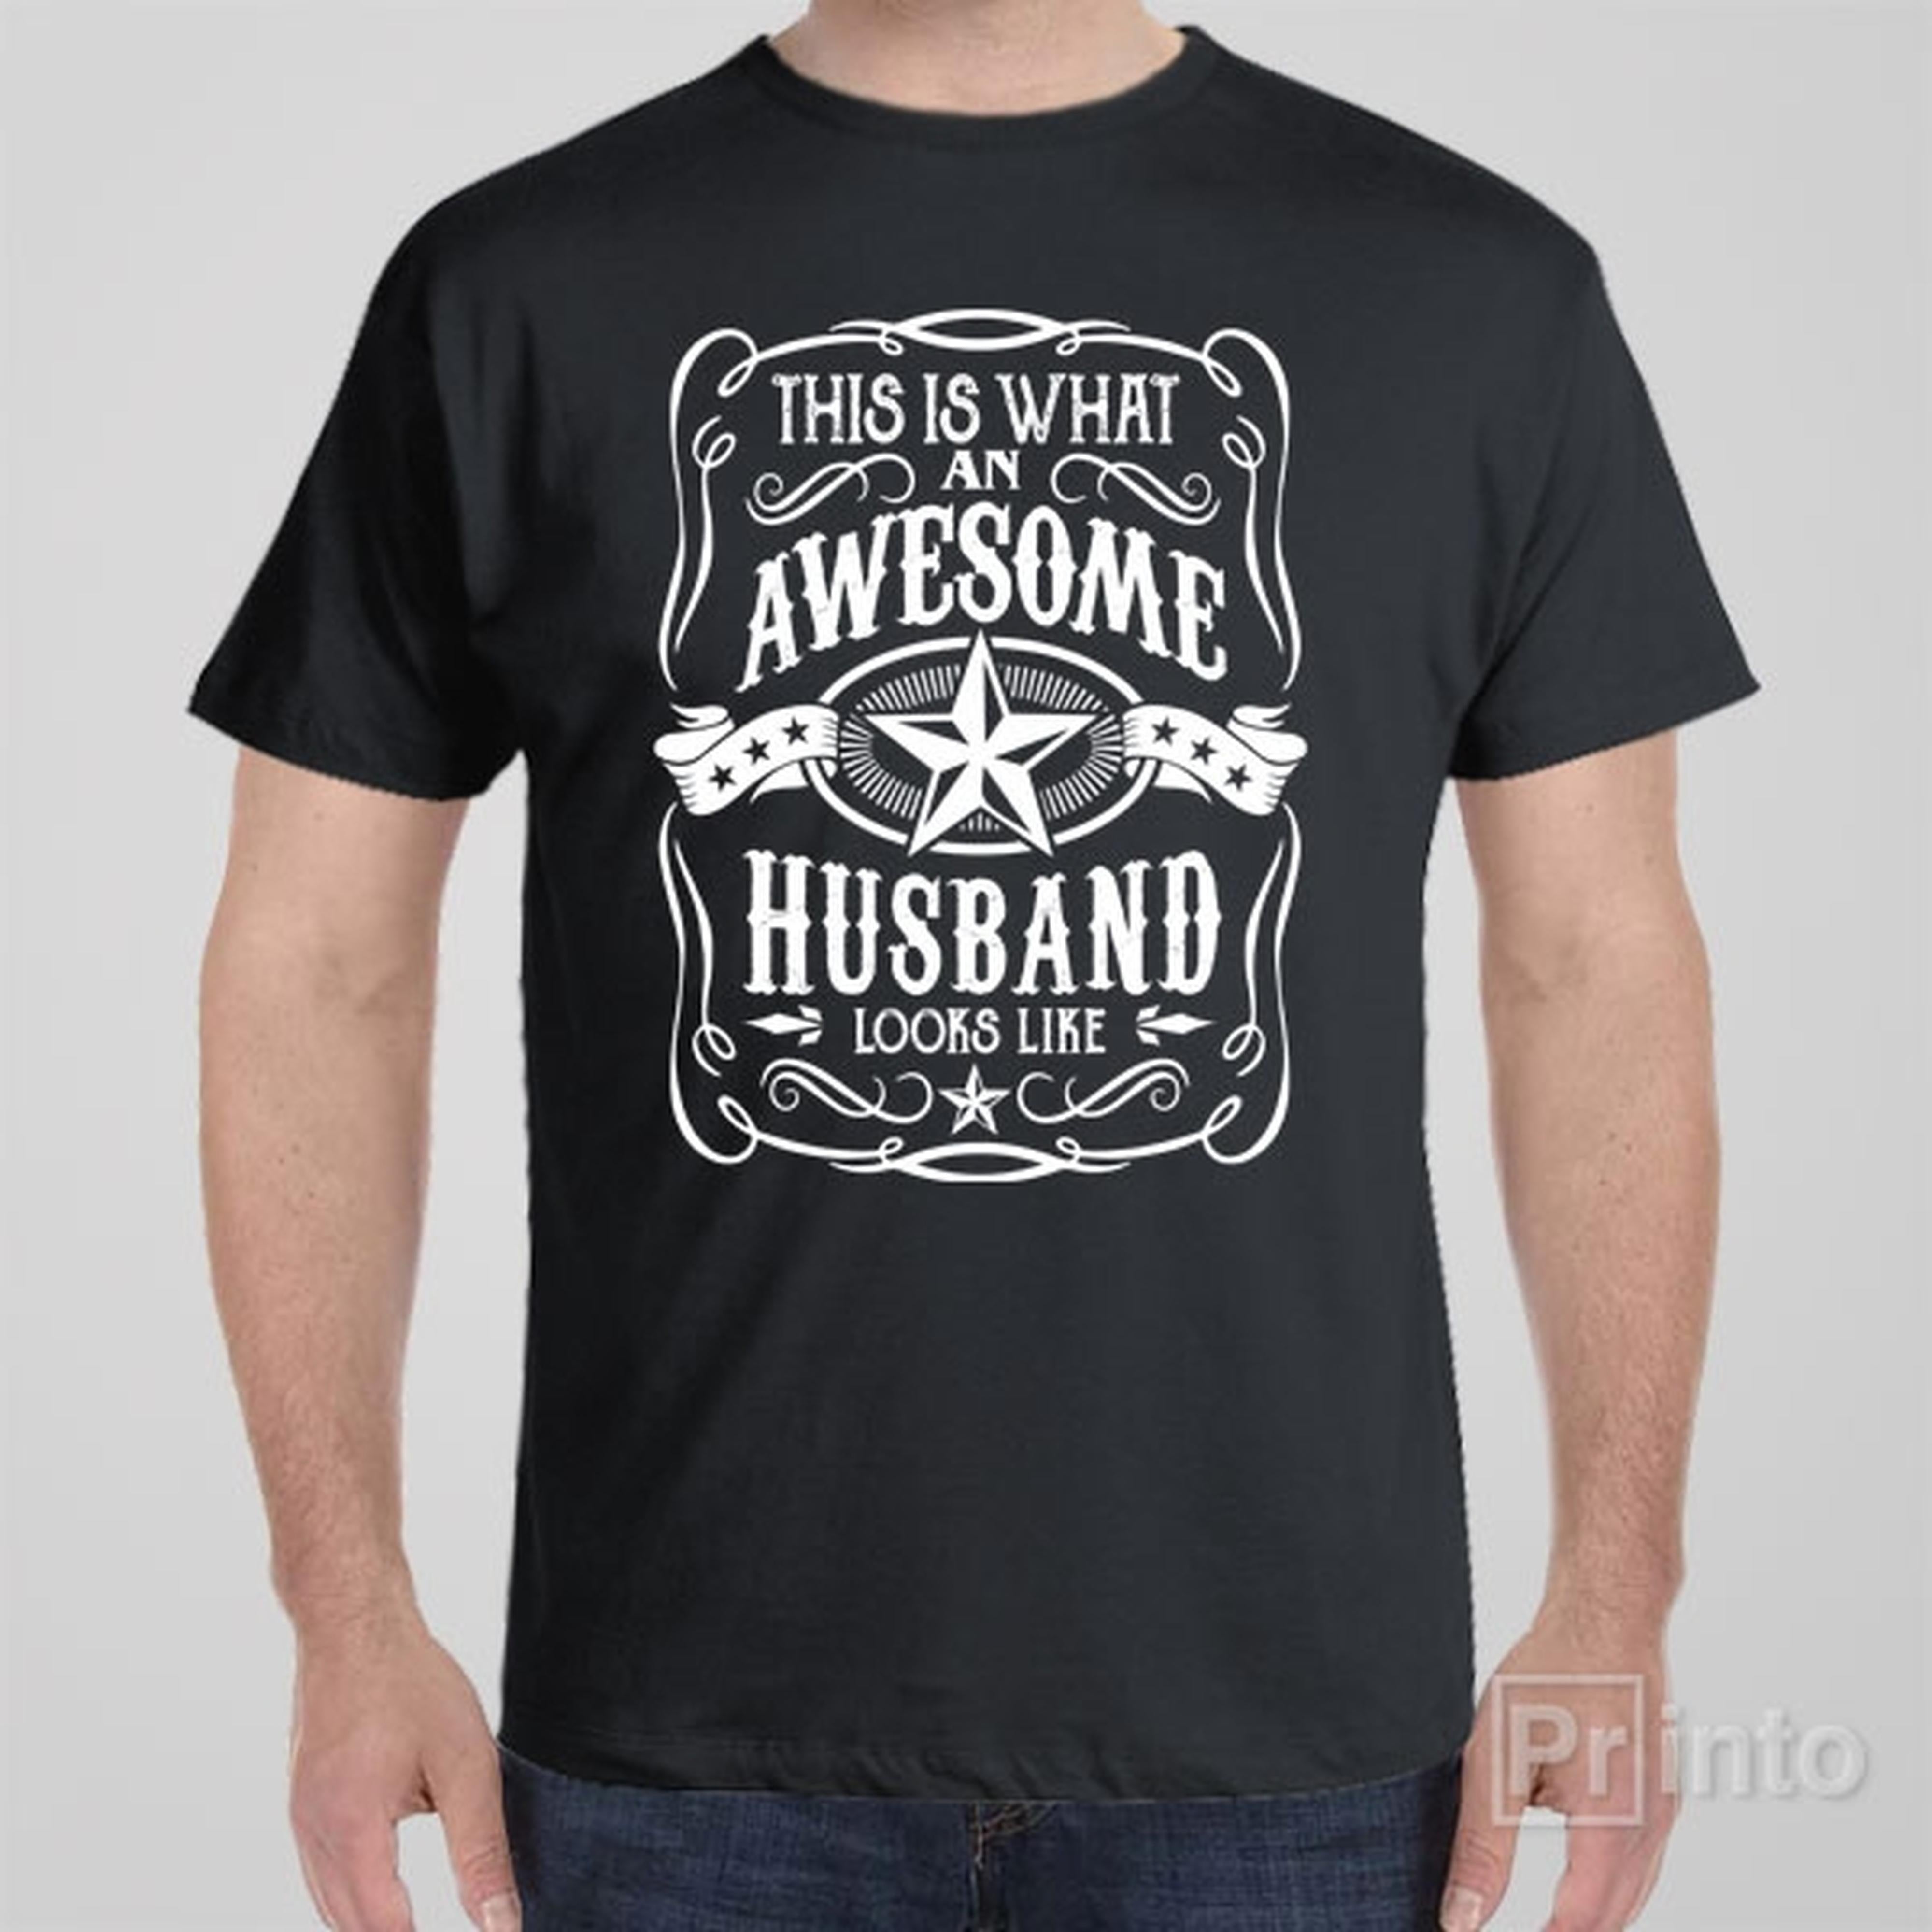 this-is-what-an-awesome-husband-looks-like-t-shirt